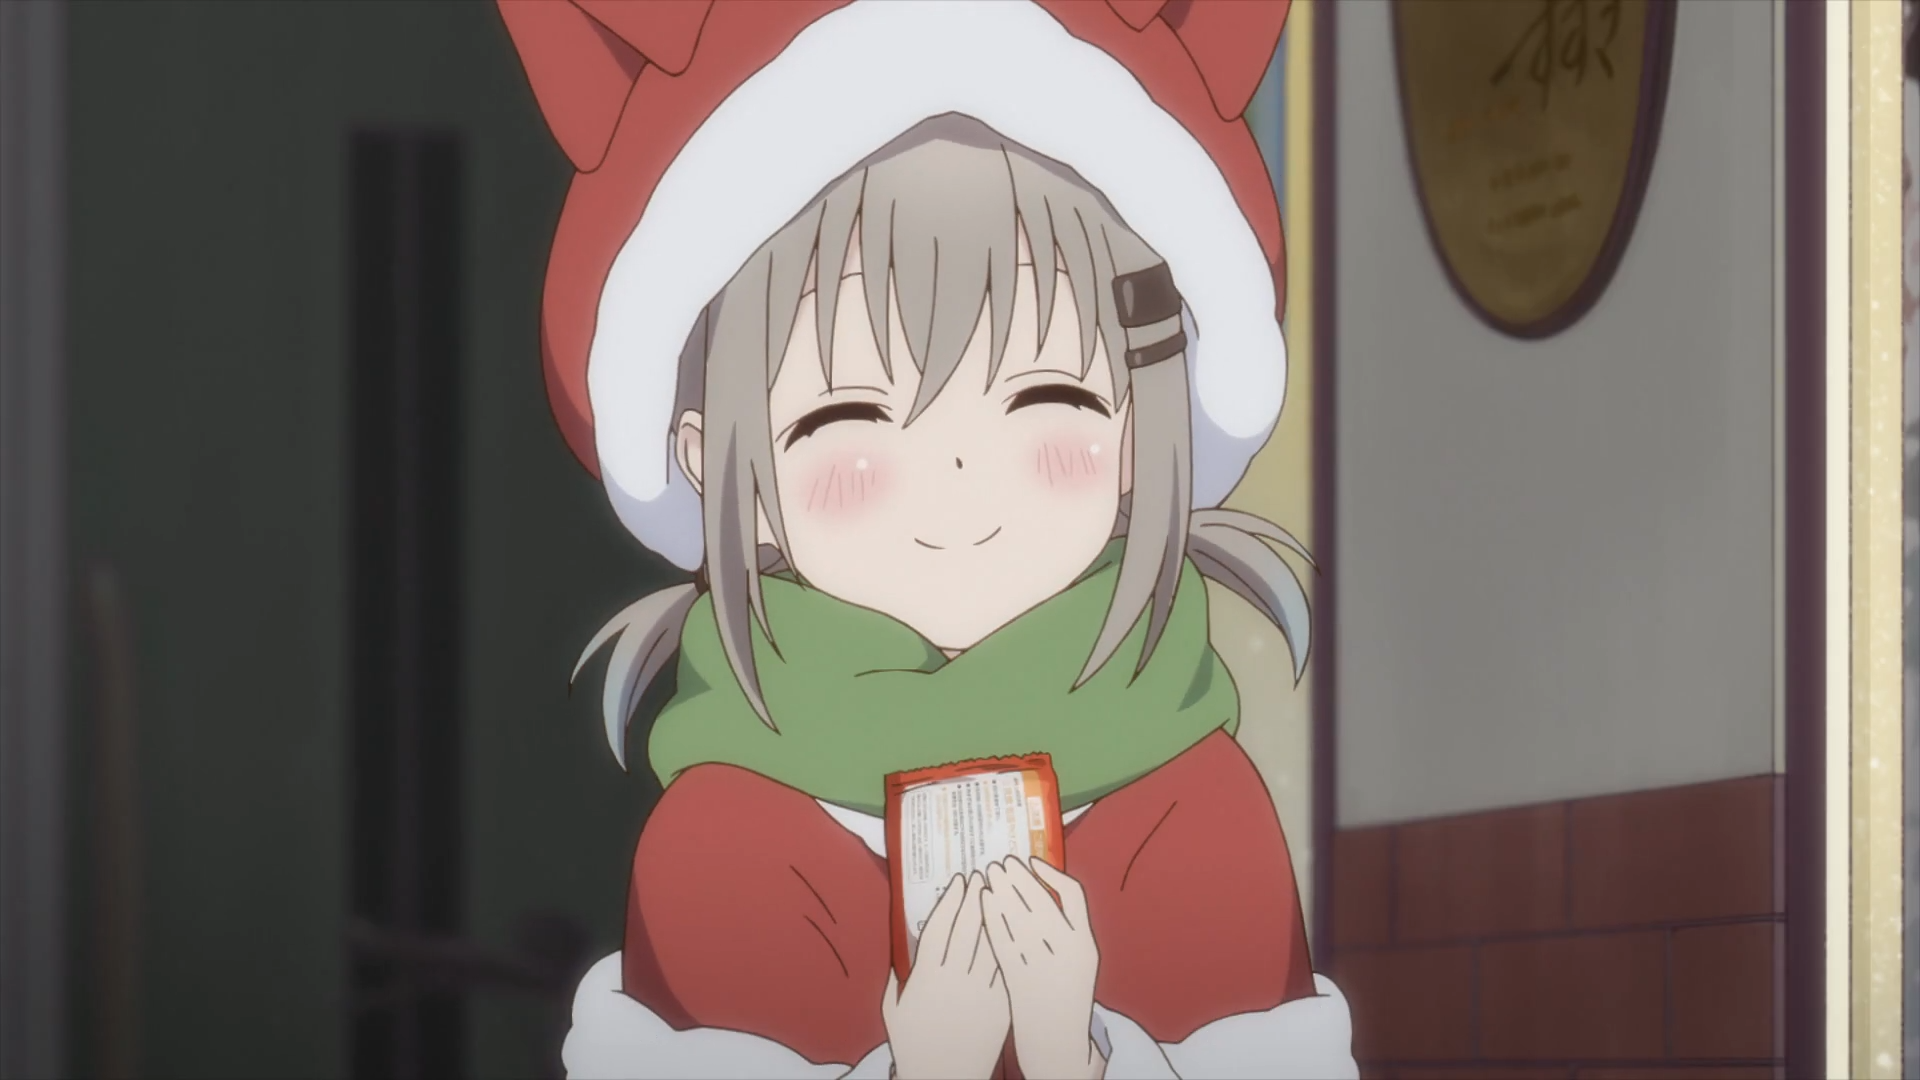 Yama no Susume: Next Summit Episode 12 Discussion - Forums